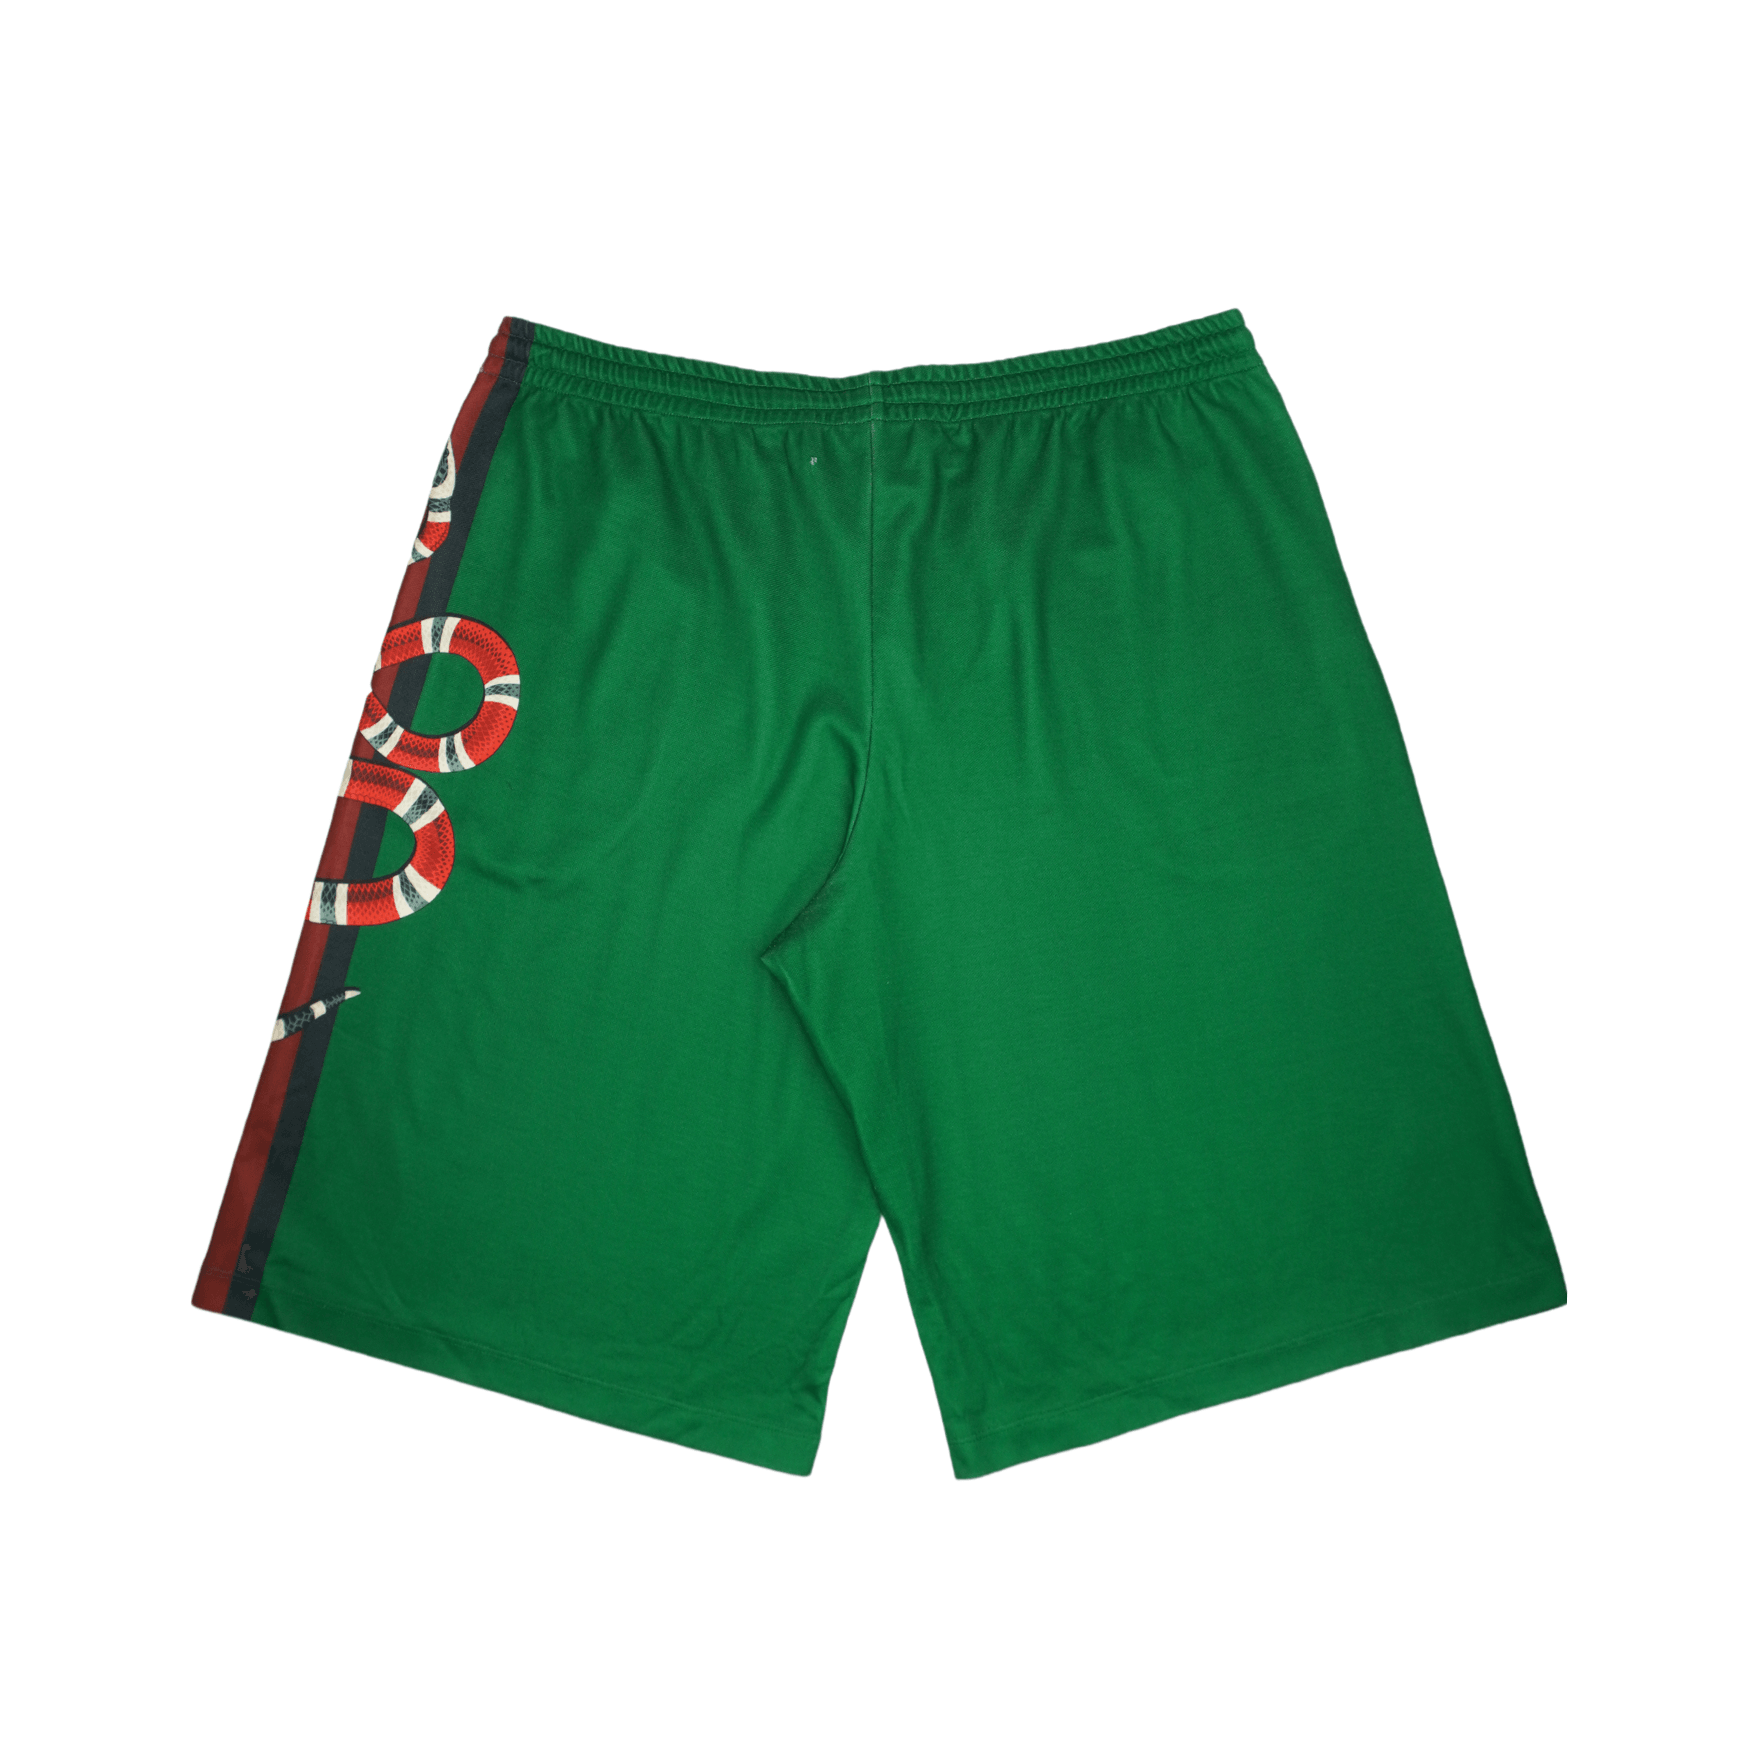 Gucci Shorts - Men's XXL - Fashionably Yours